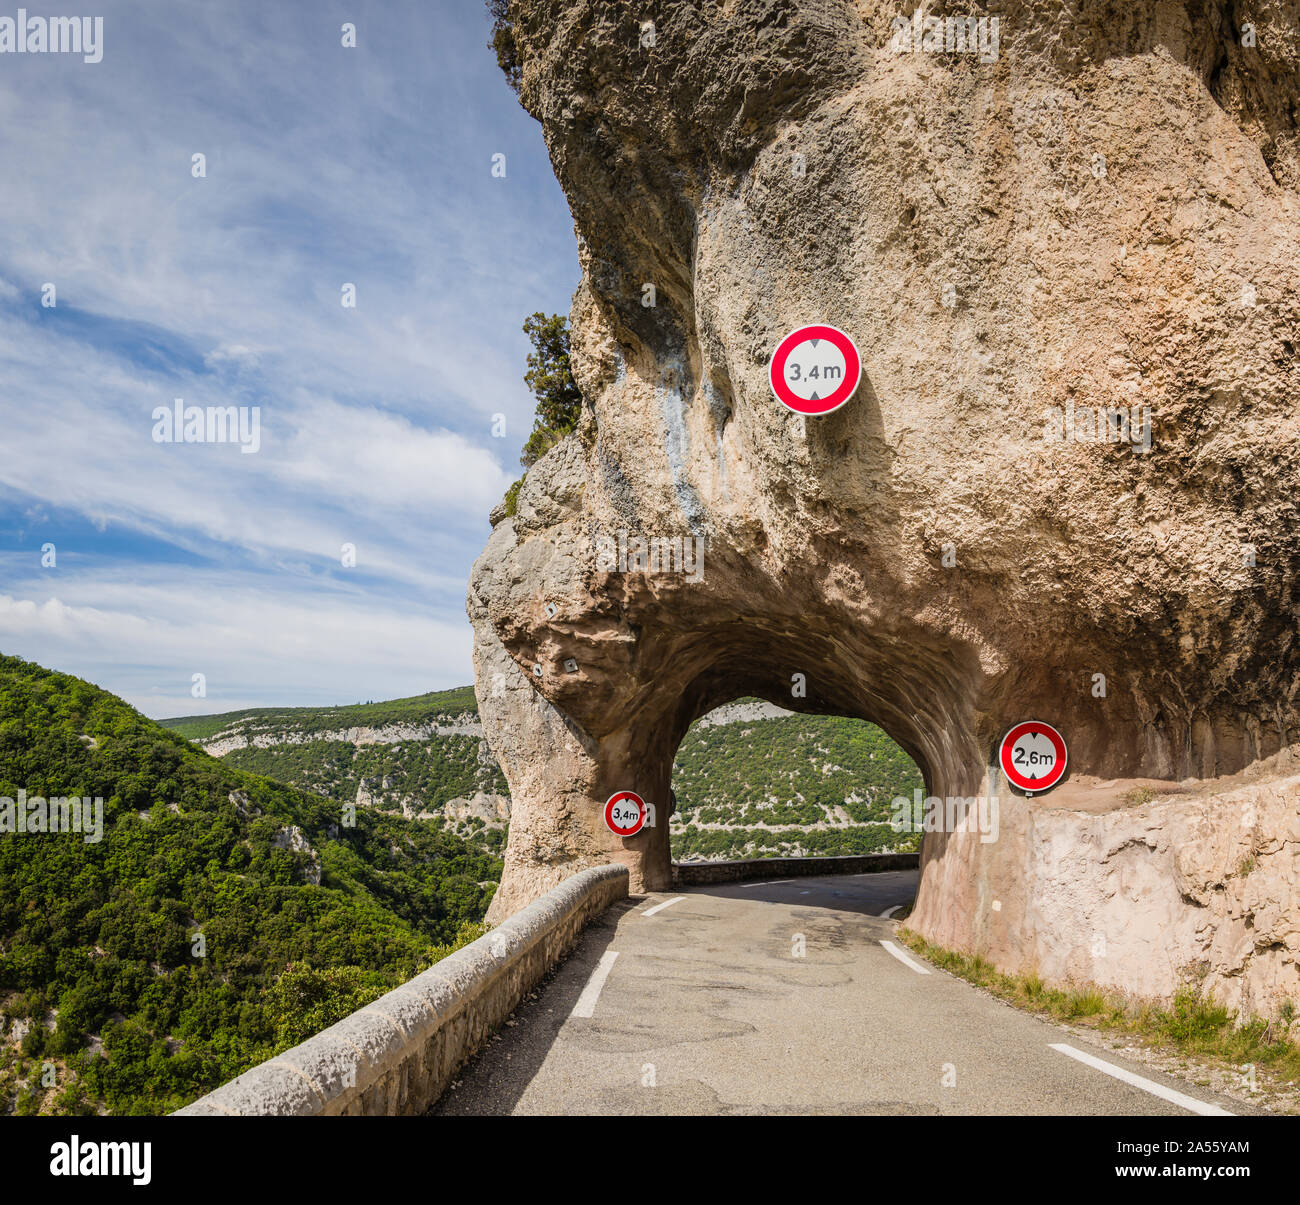 Tunnel on the road through Gorges de la Nesque, Provence, France Stock Photo